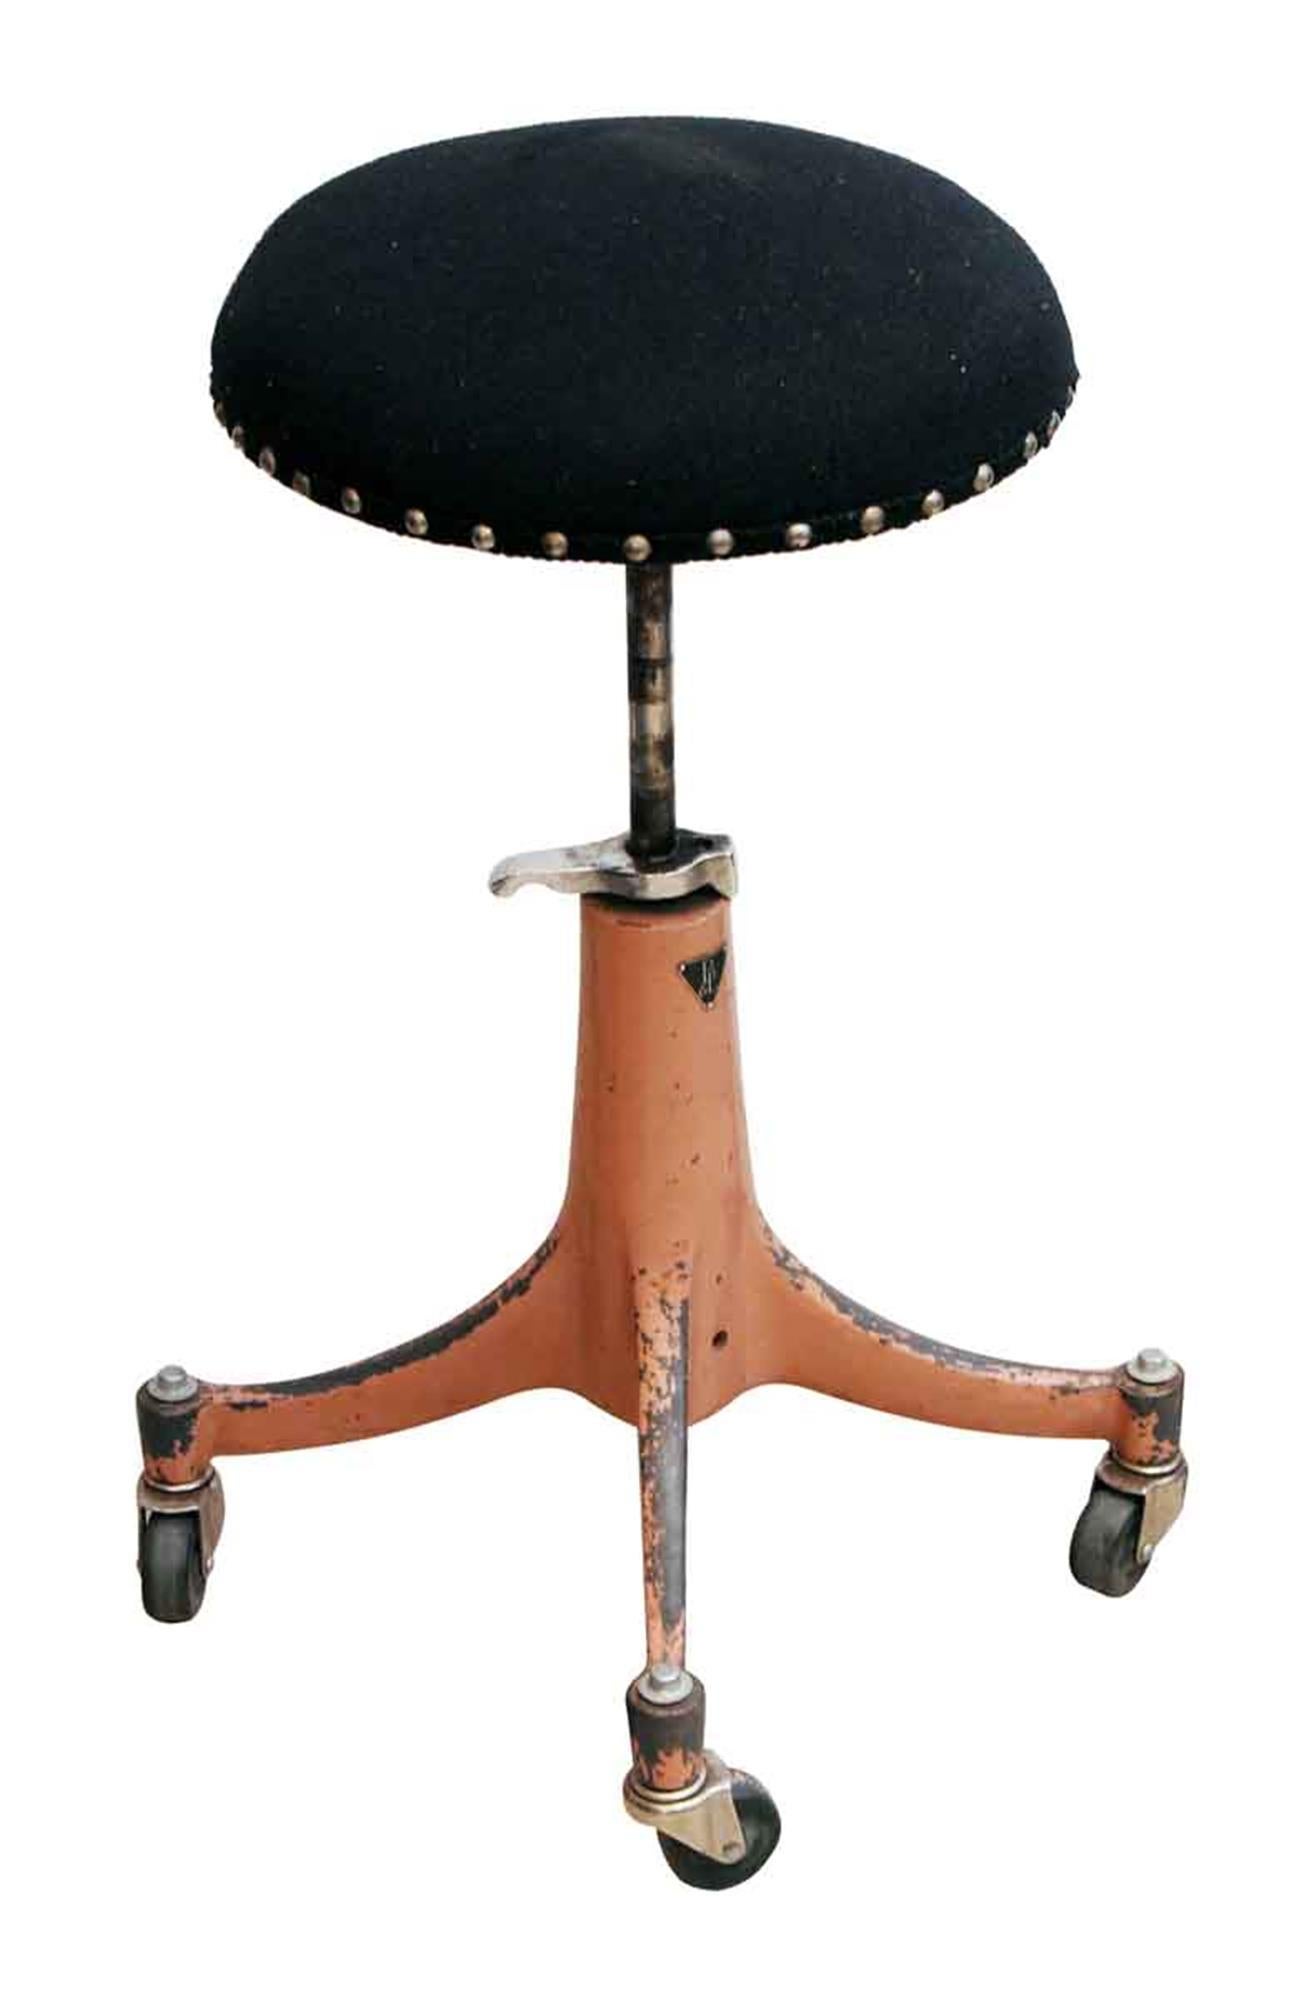 1920s adjustable doctor's stool with a black upholstered seat and pink painted base. Made by Bausch & Lomb. The wheels work well. This can be seen at our 5 East 16th St location on Union Square in Manhattan.